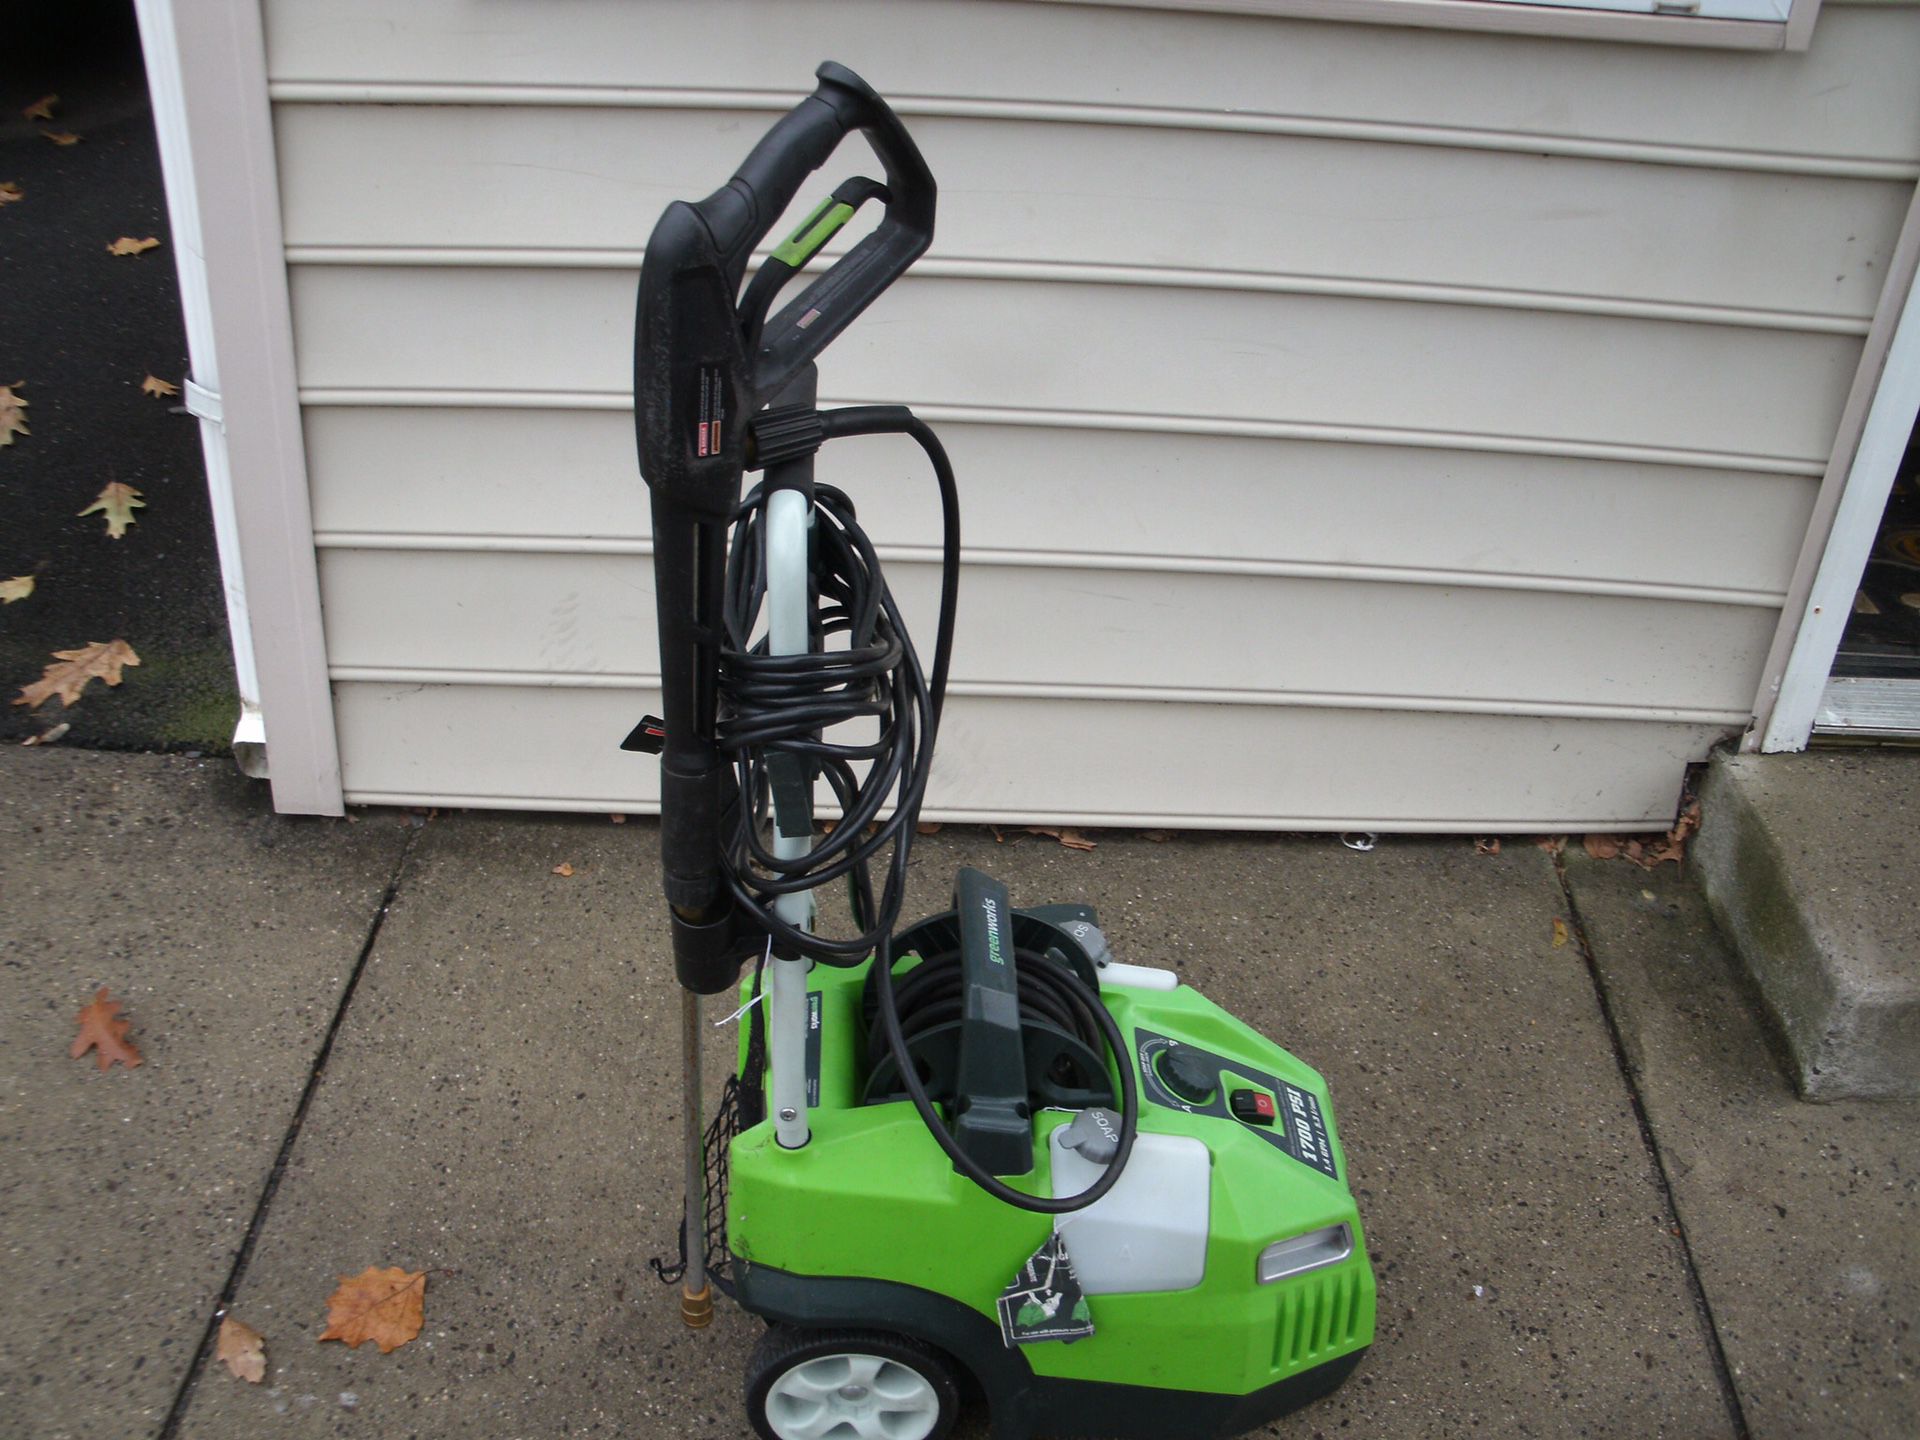 Greenworks 1700-PSI 1.4-GPM Cold Water Electric Pressure Washer Model # 51012 selling for parts runs but does not built pressure pressure washer h